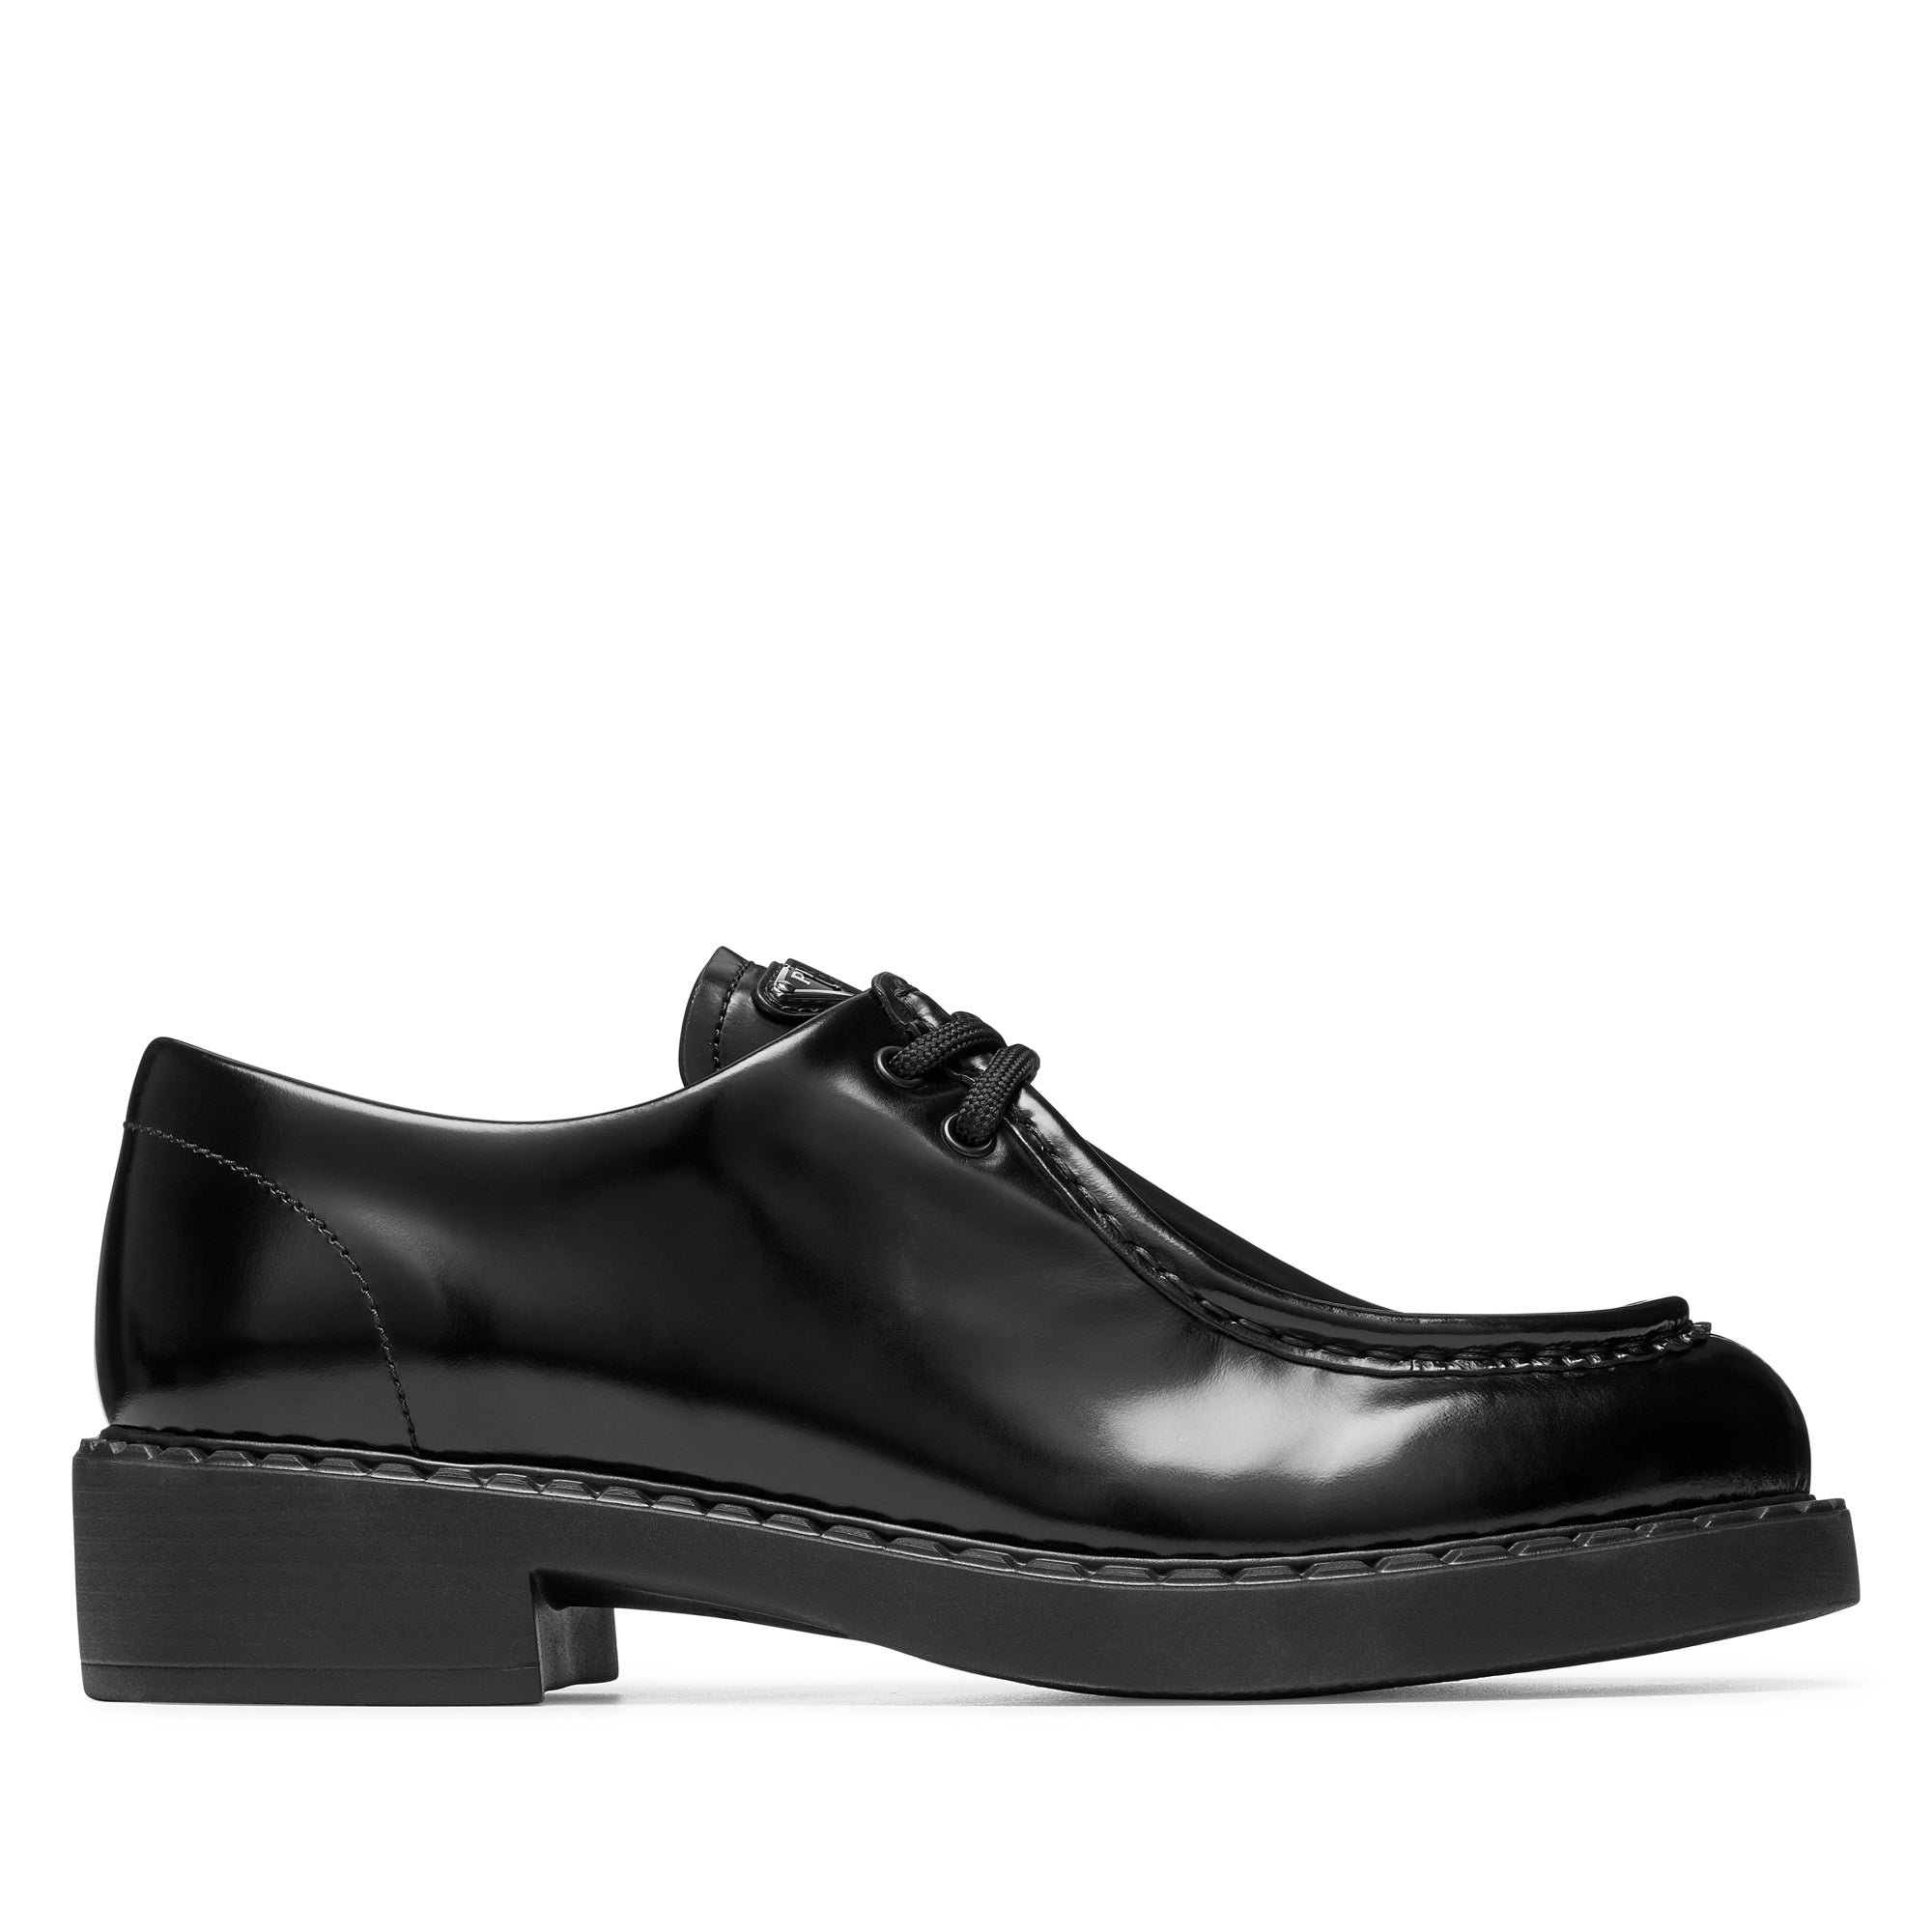 Prada - Women's Brushed Leather Lace-Up Shoes - (Nero) view 1